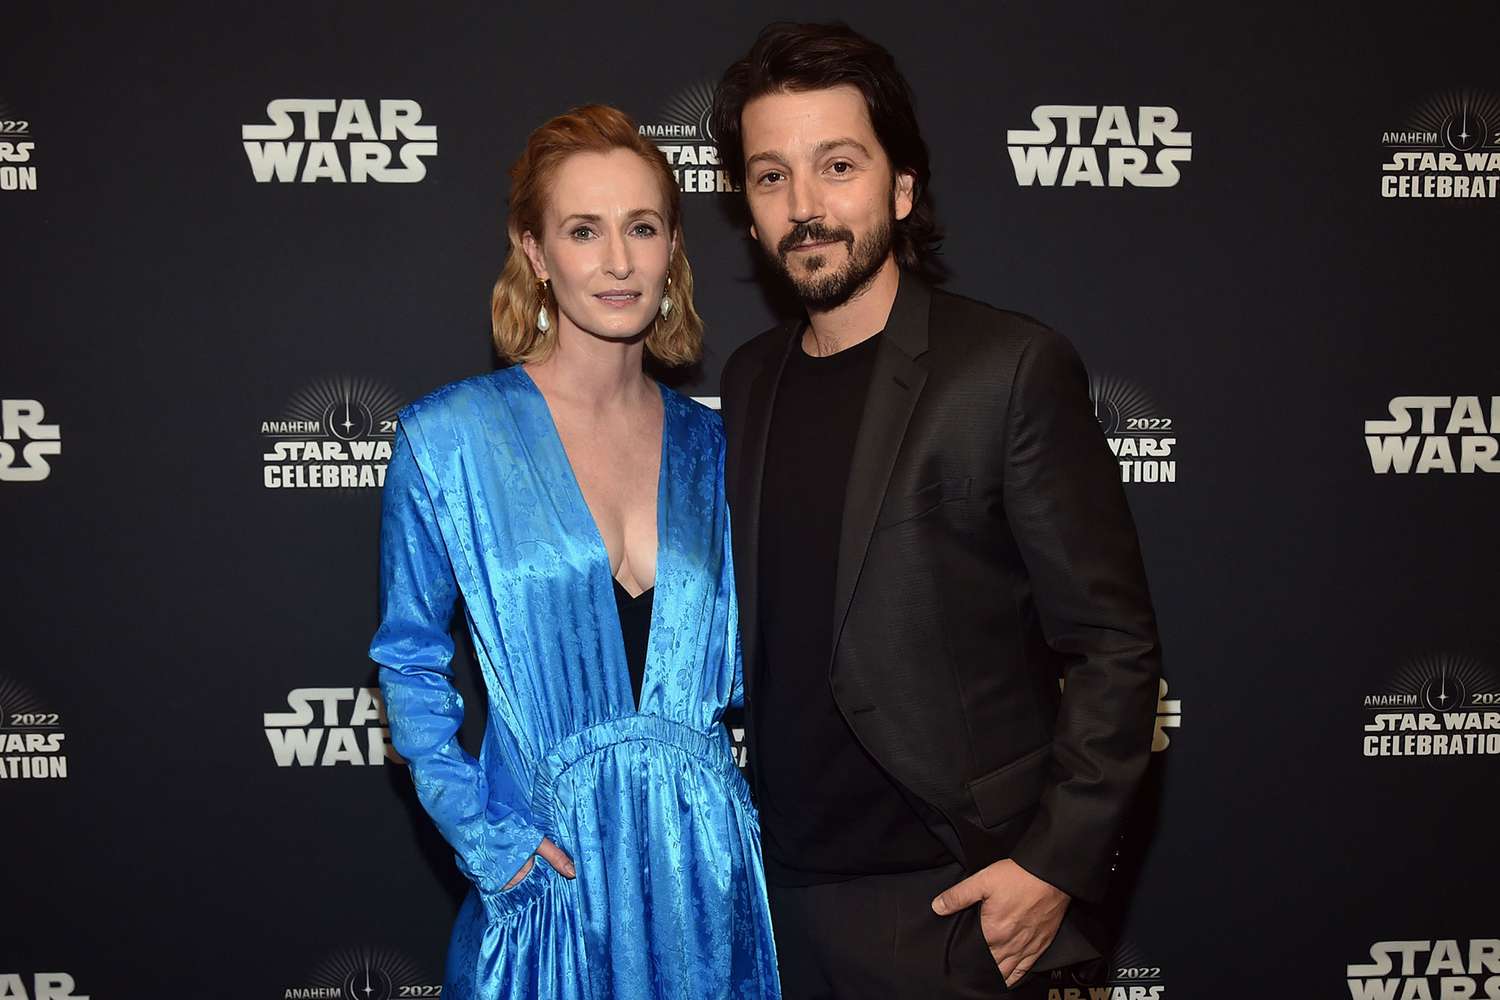 Genevieve O'Reilly and Diego Luna attend the studio showcase panel at Star Wars Celebration for “Andor” in Anaheim, California on May 26, 2022. The new original series from Lucasfilm launches exclusively on Disney+ August 31.